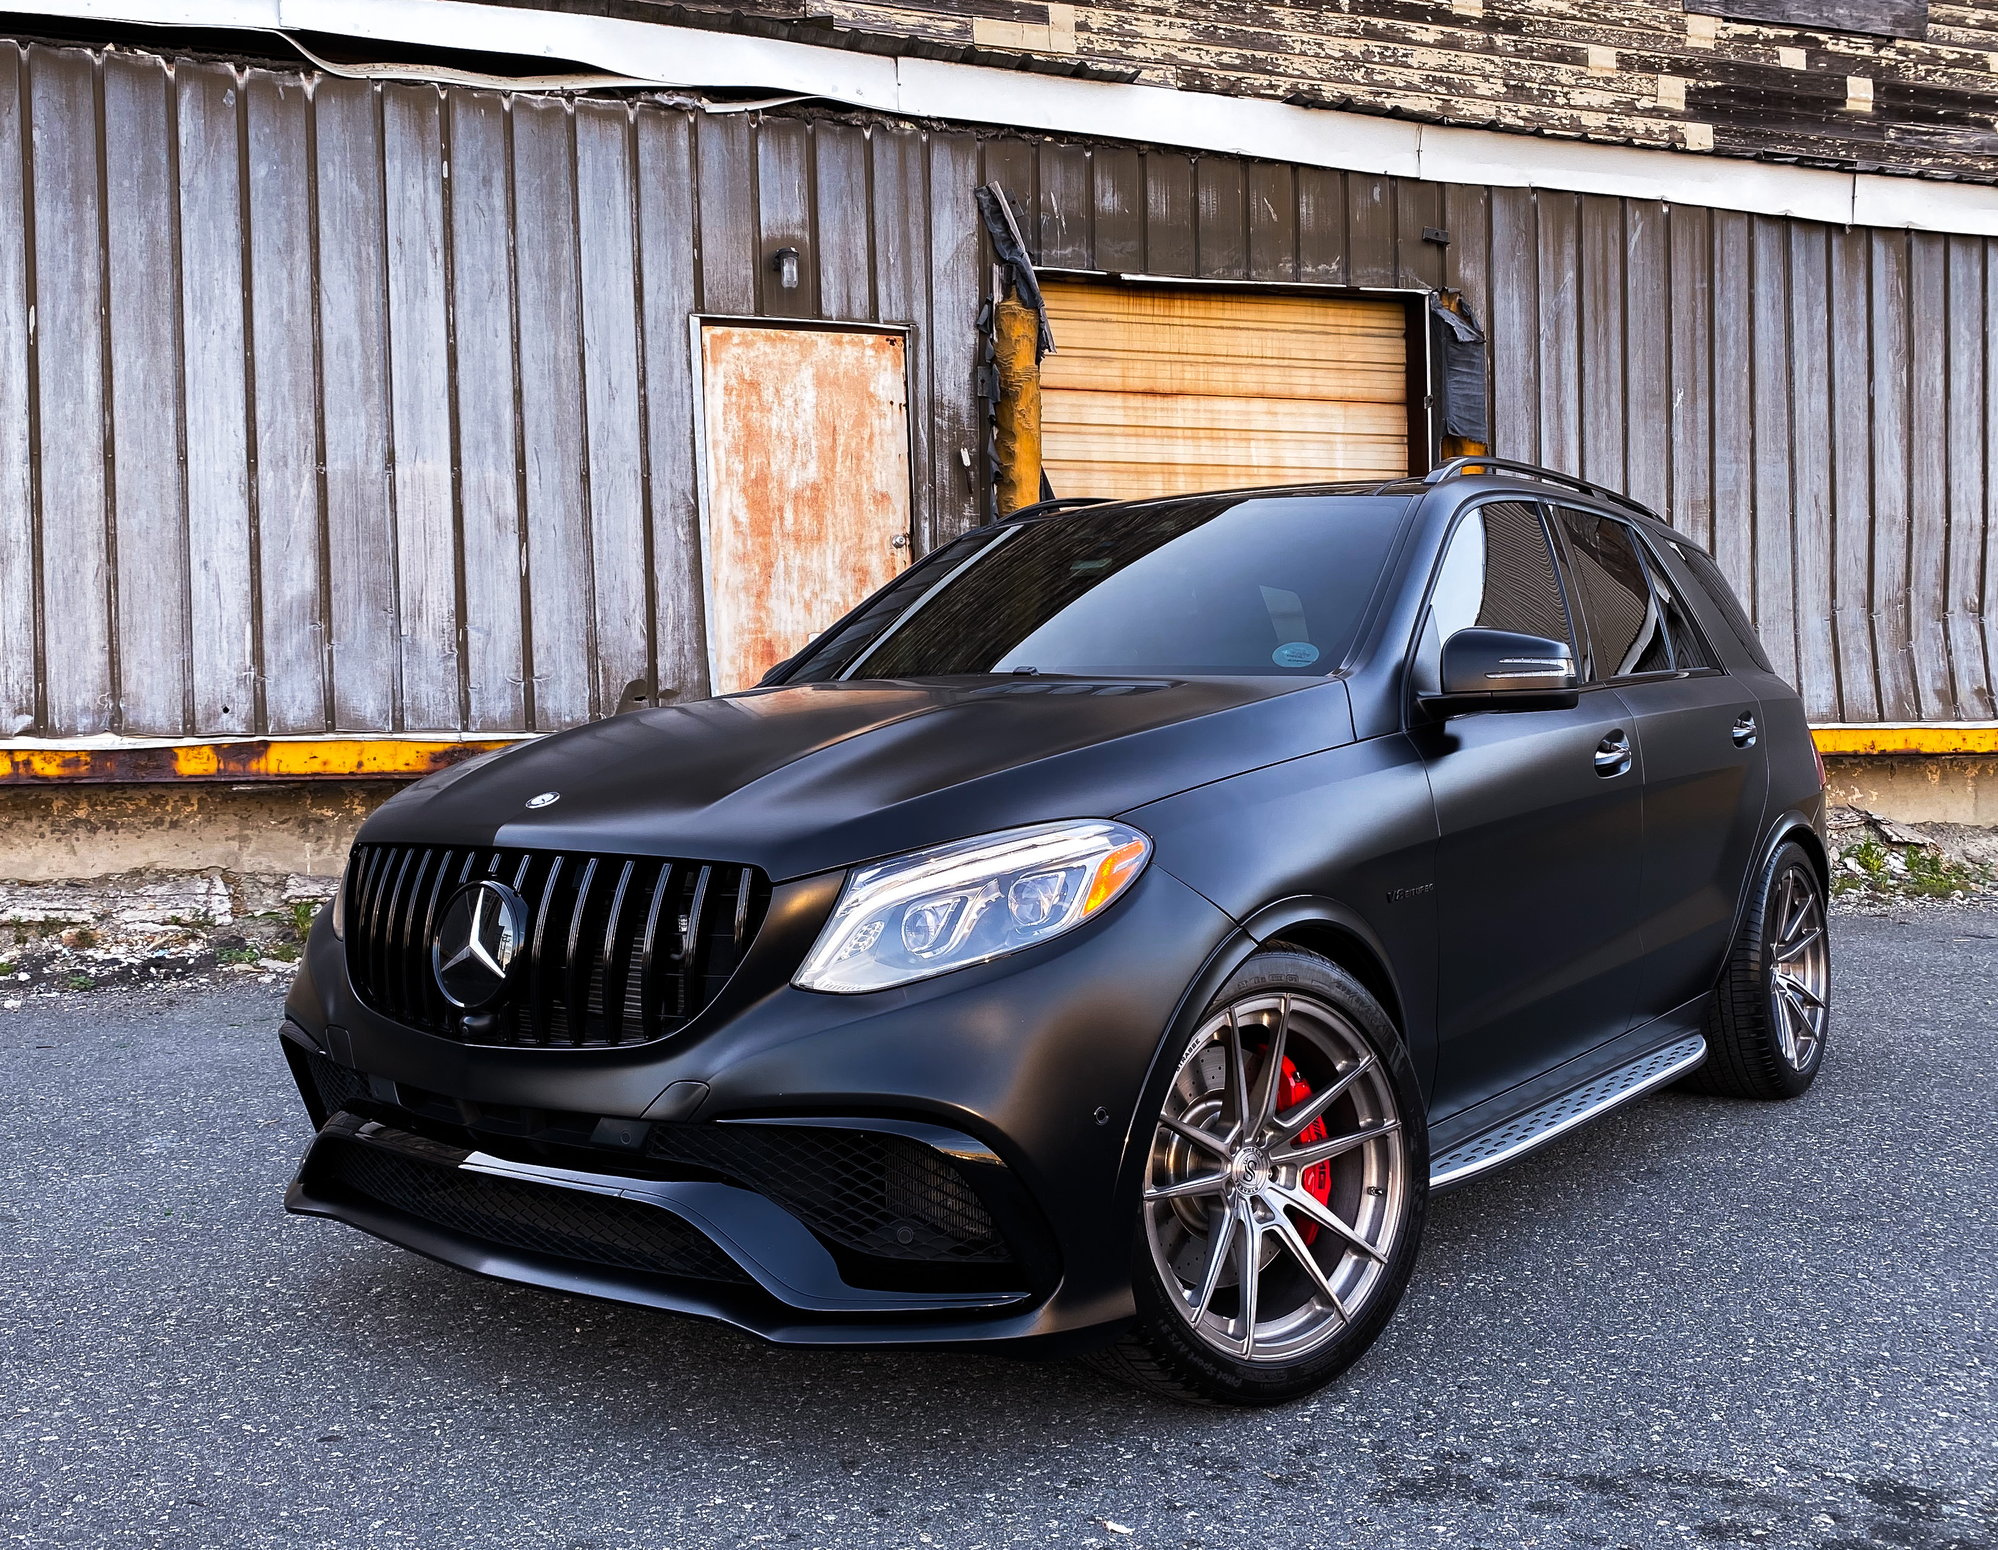 Wheels and Tires/Axles - FS: Strasse Forged SV1 Wheels (GLE/ML/GLS Fitment) - Used - All Years Mercedes-Benz GLE-Class - Boston, MA 02210, United States